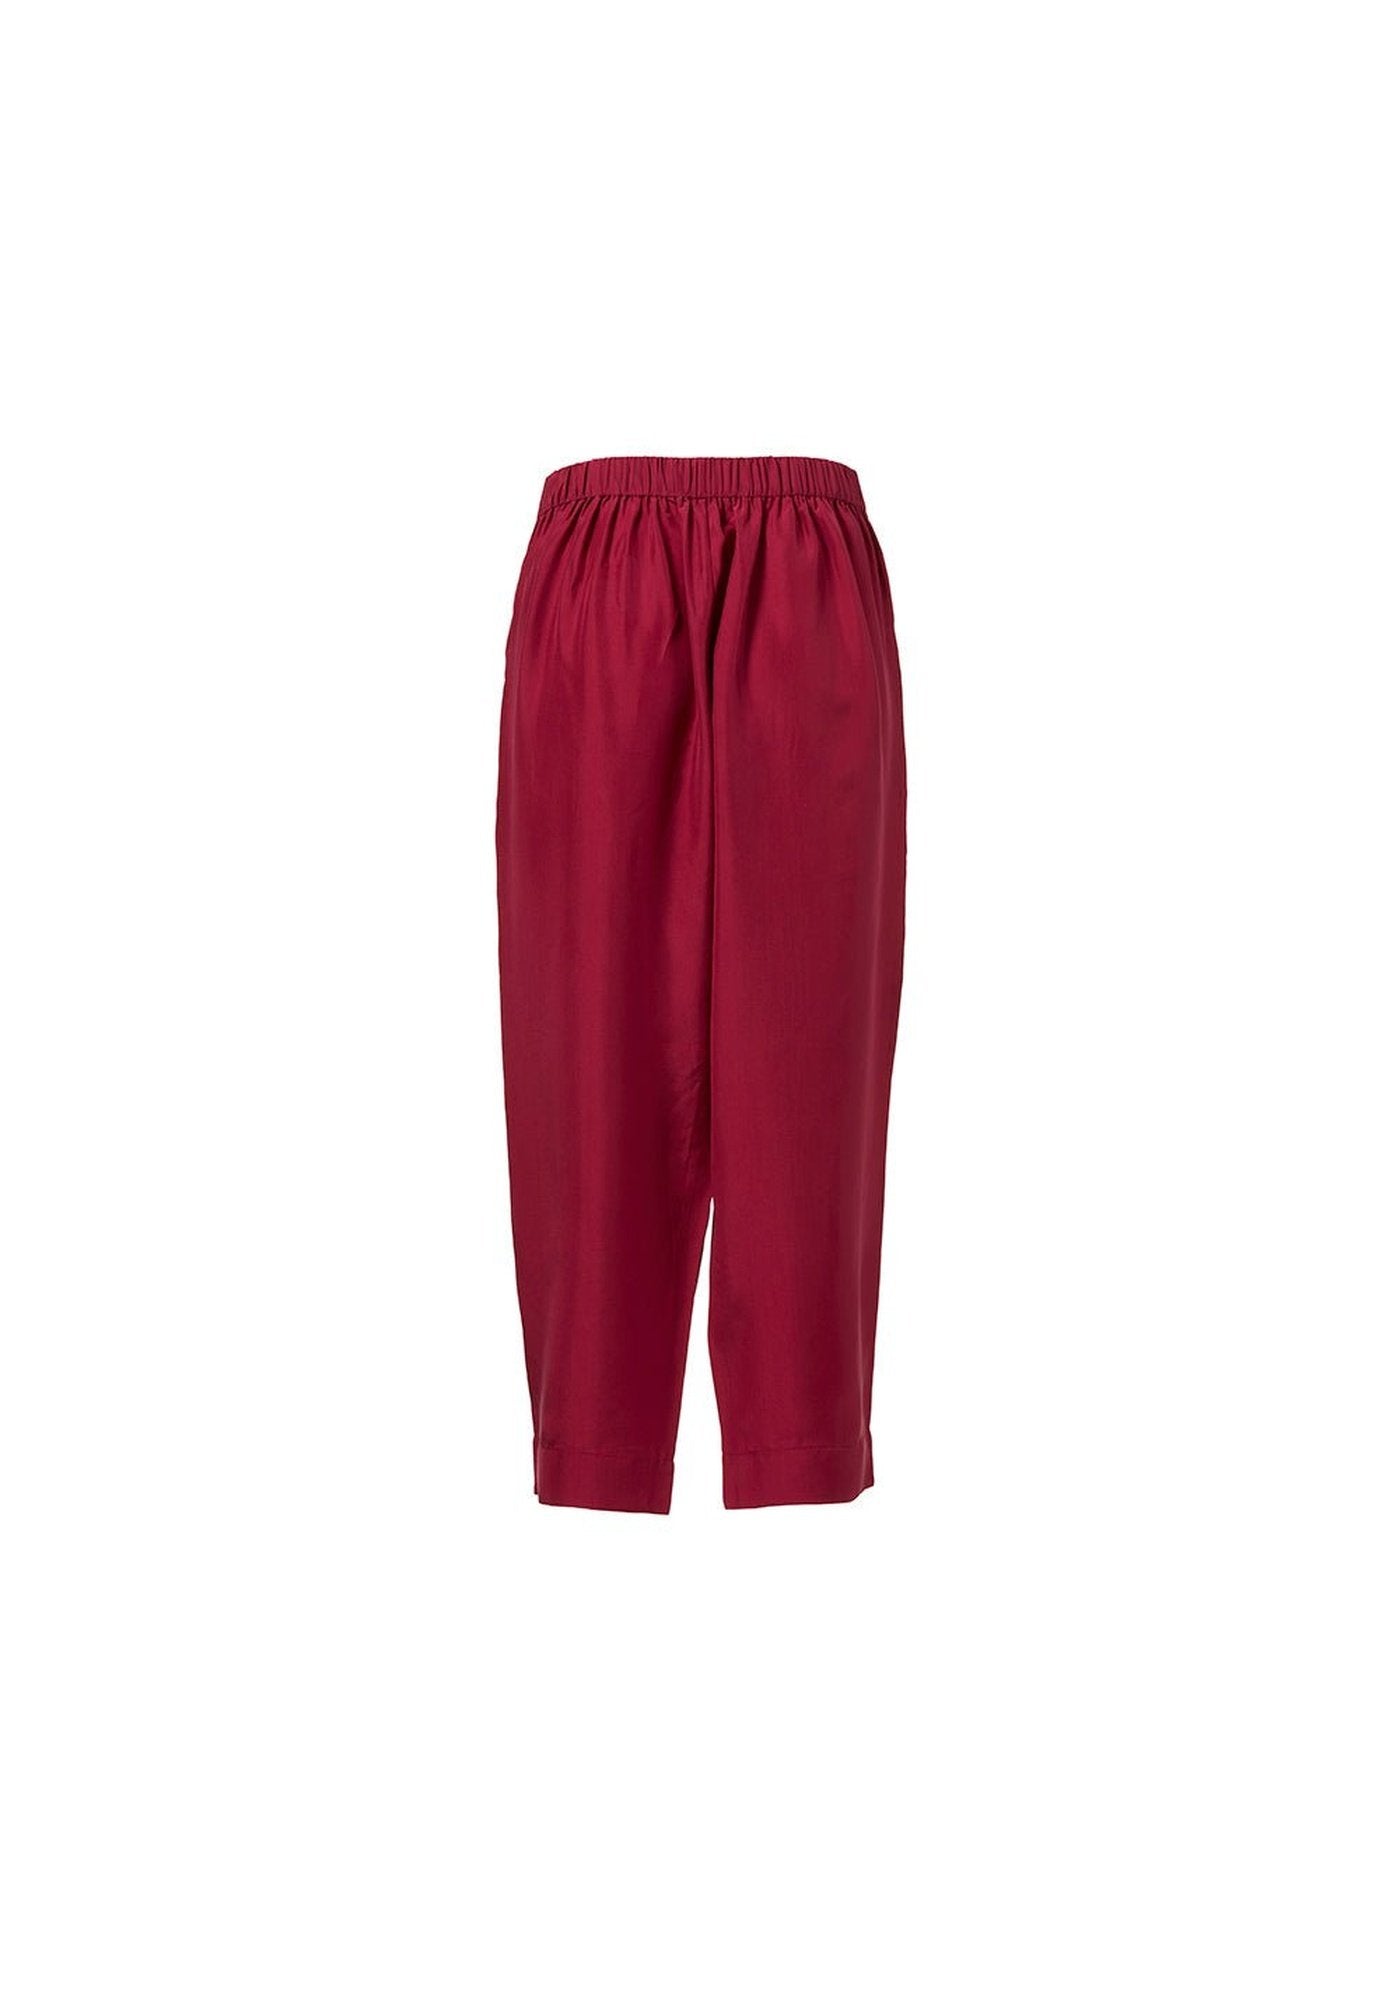 Trousers Still Beet Red - Traces of Me